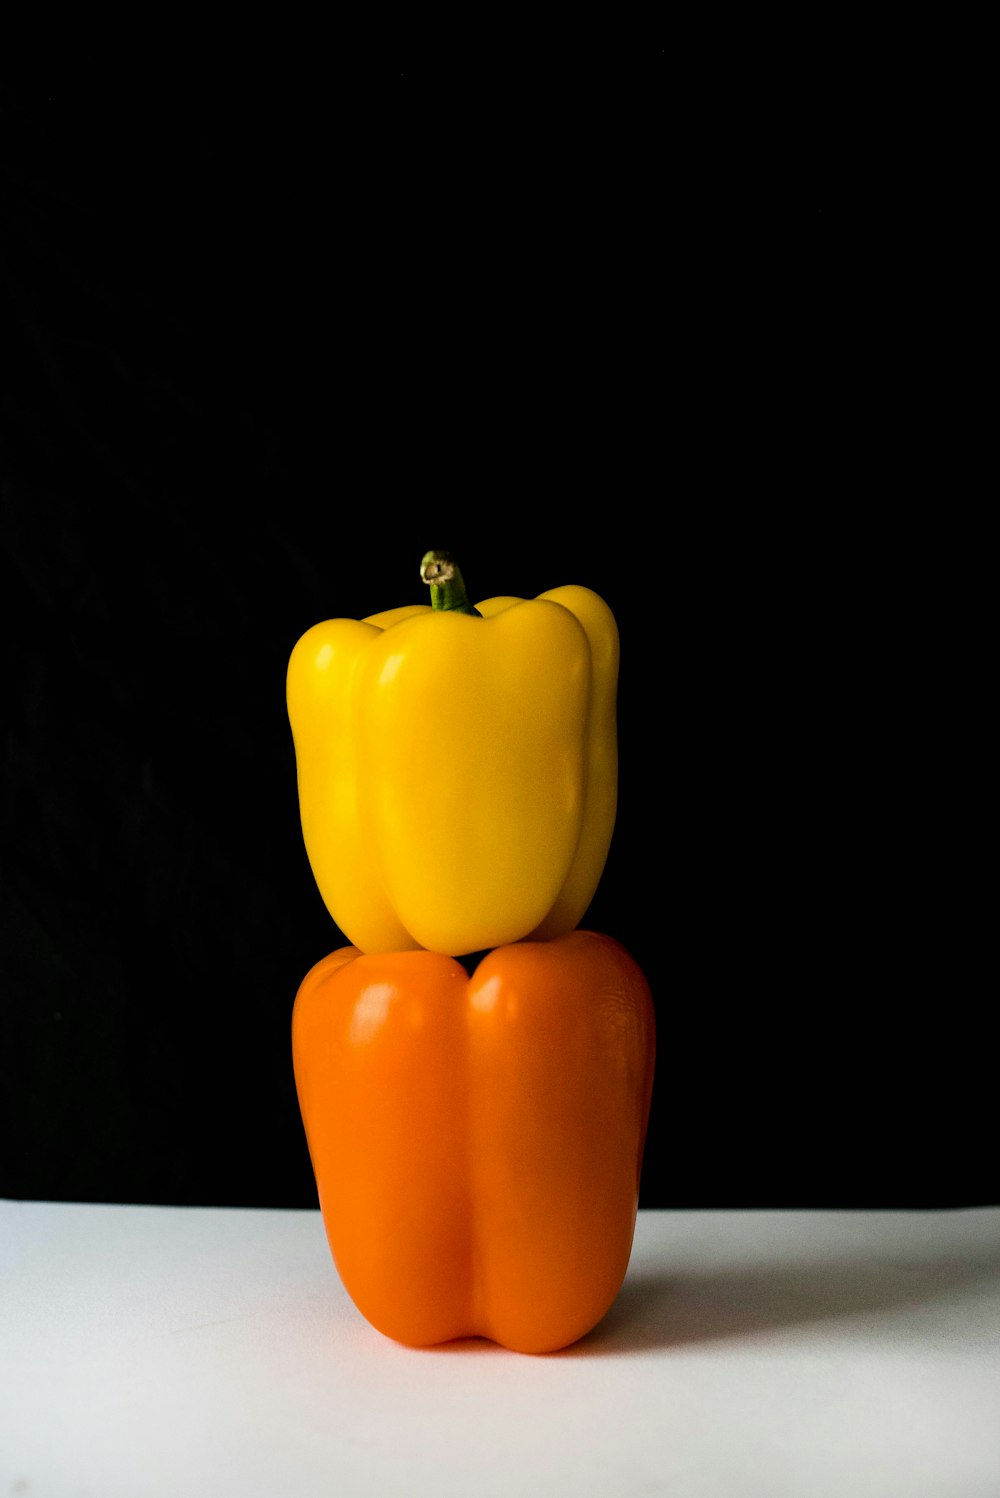 two yellow and orange bell peppers on white surface